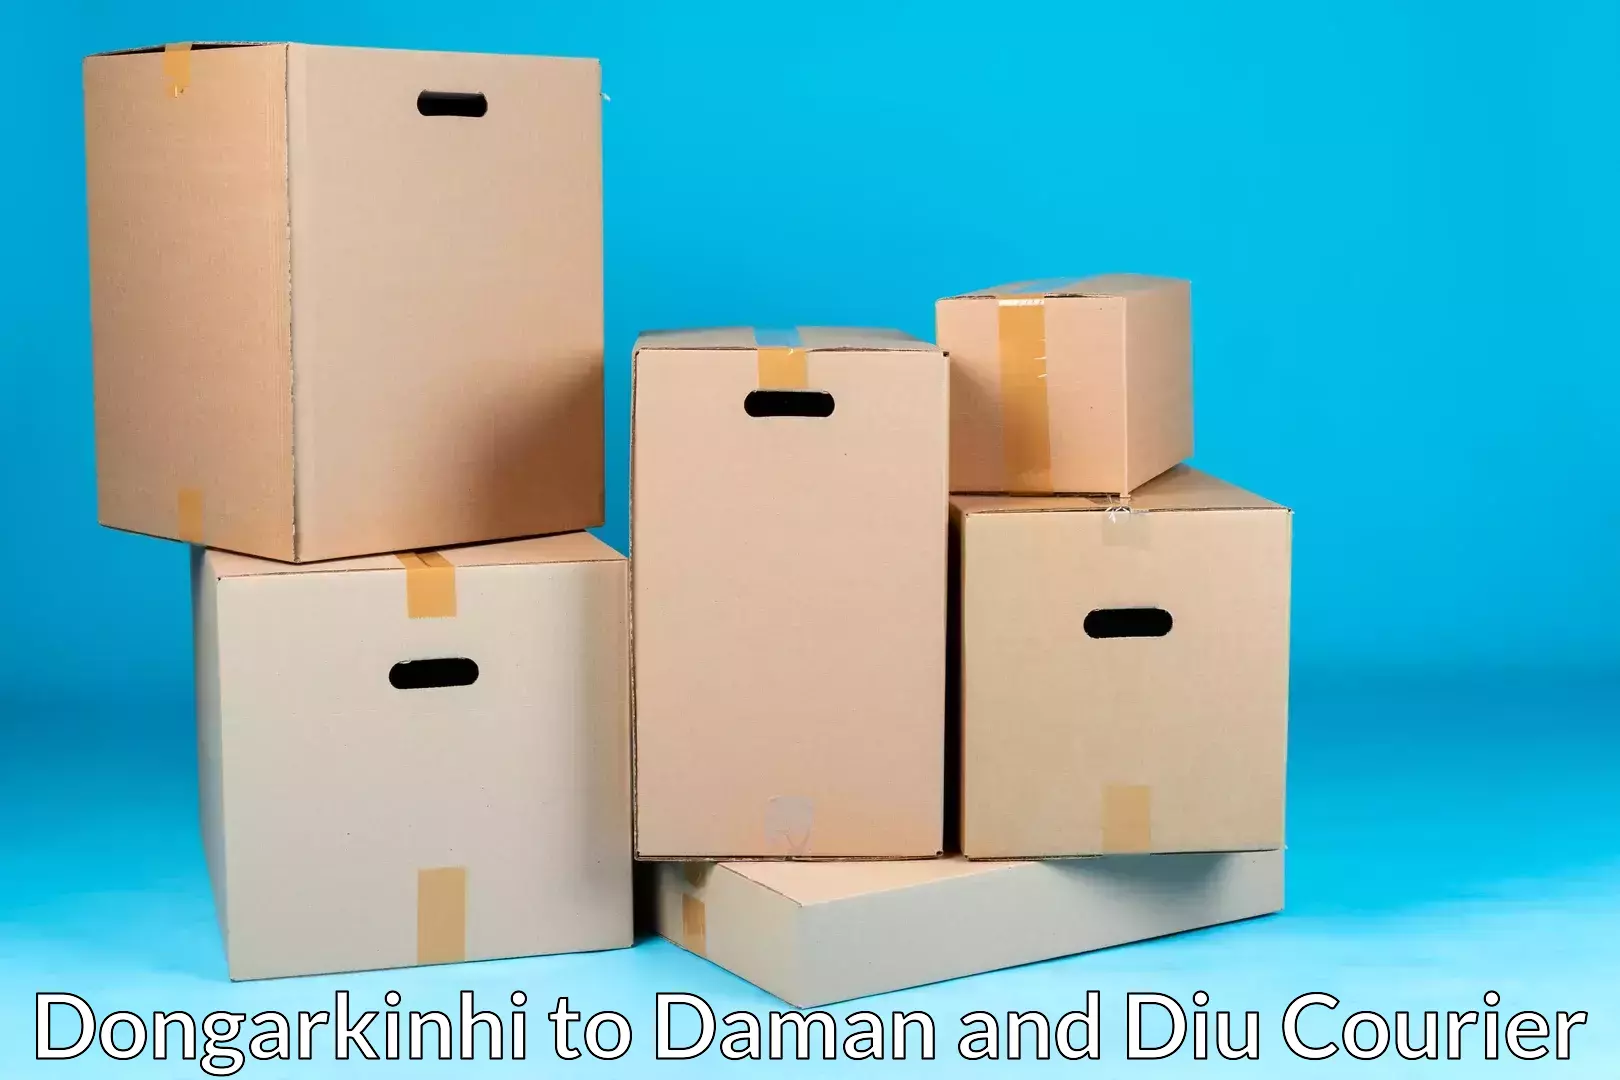 Trusted home movers Dongarkinhi to Daman and Diu